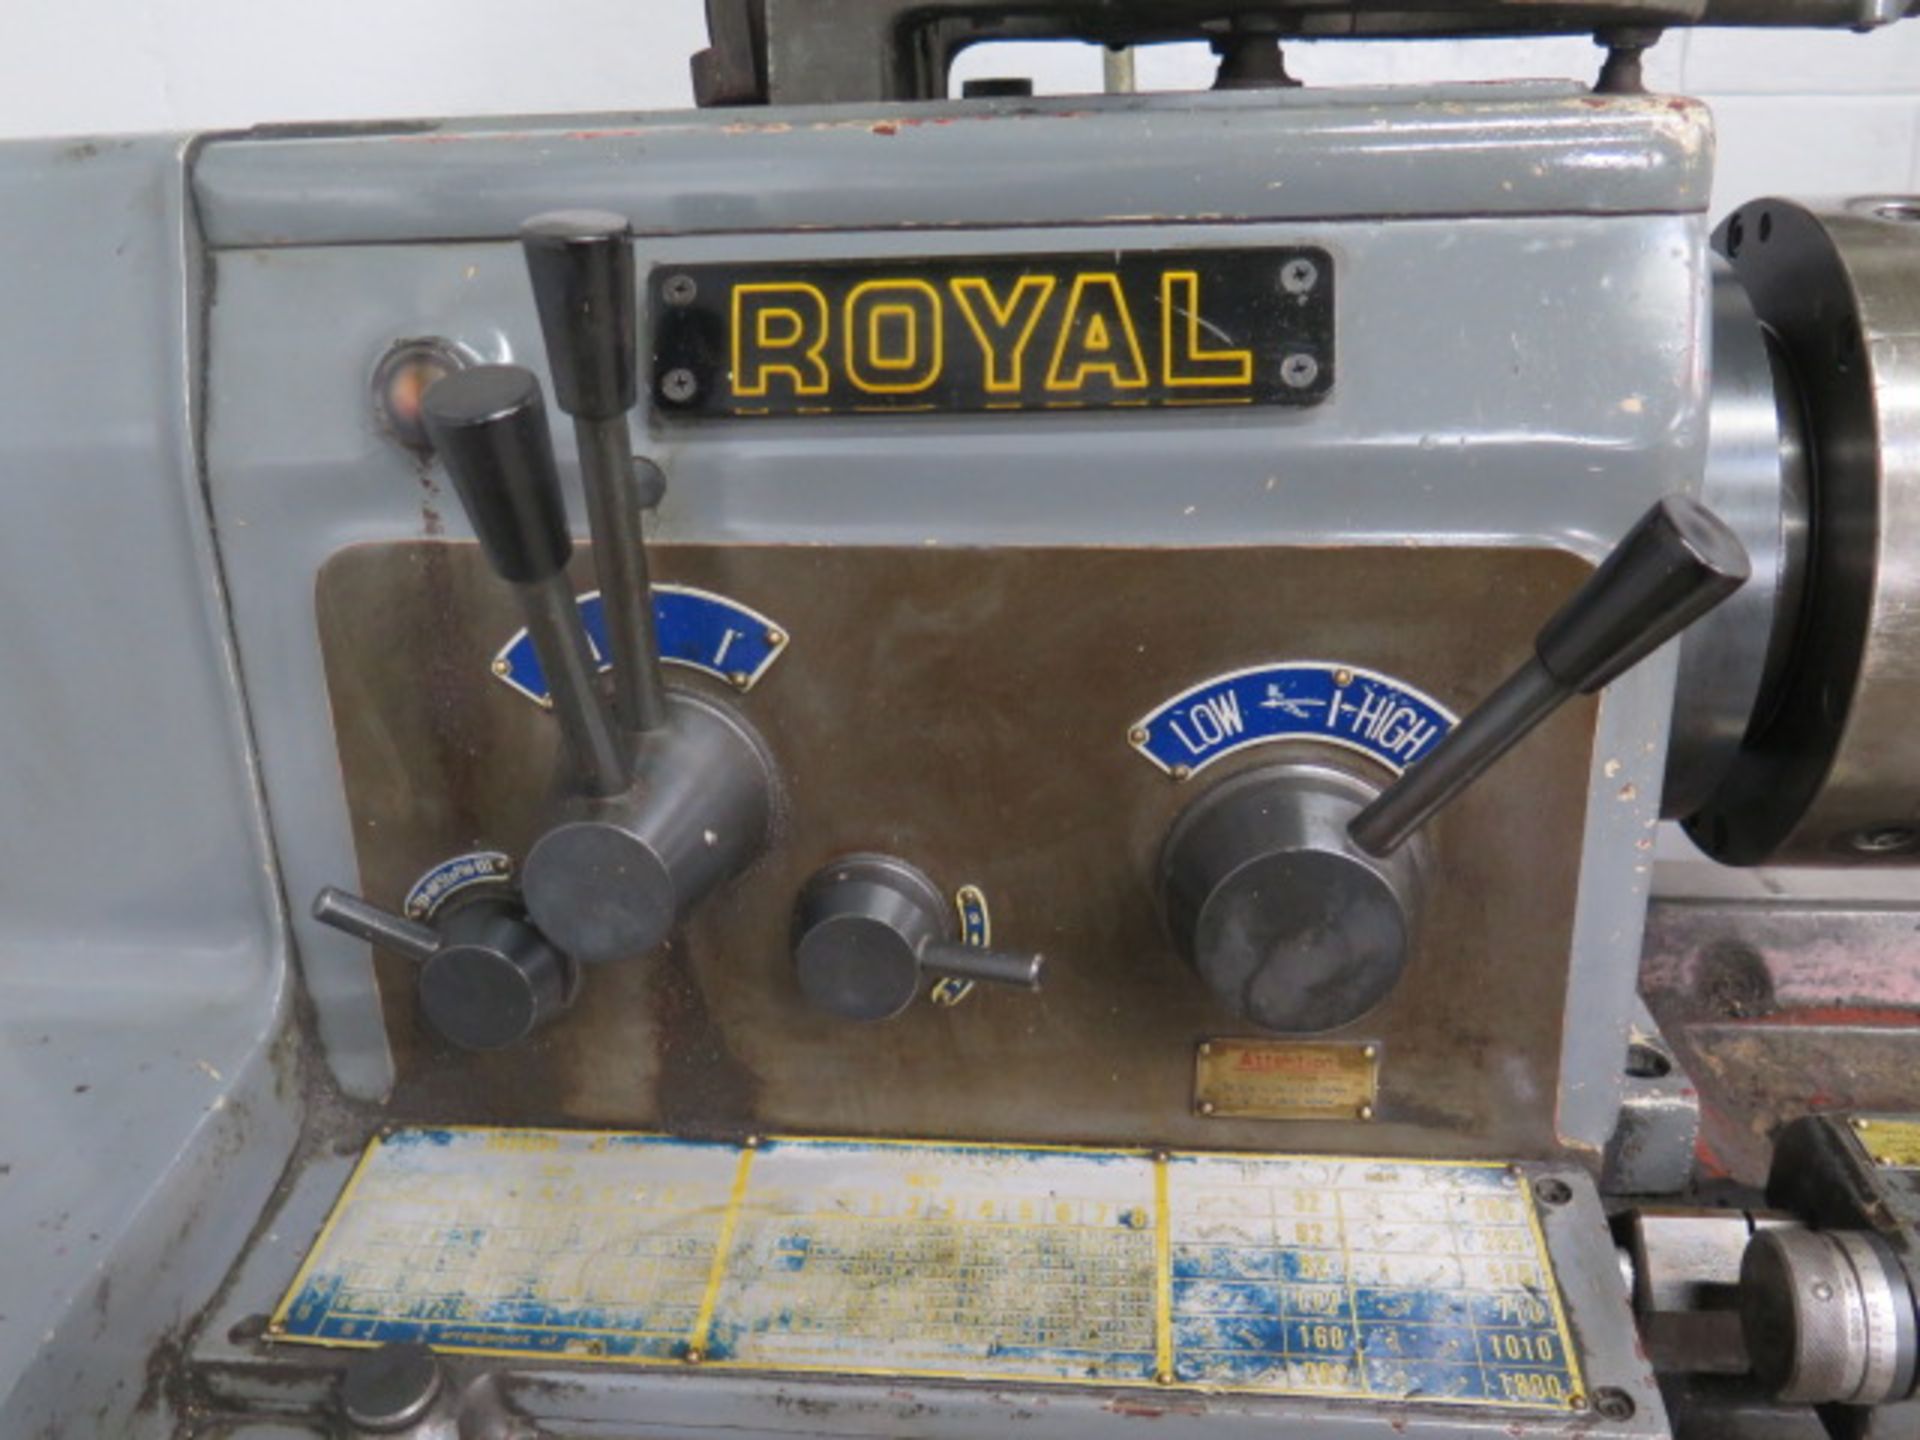 Royal 17” x 42” Geared Head Gap Bed Lathe s/n 79C928 w/ 32-1800 RPM, Taper Attachment, SOLD AS IS - Image 5 of 25